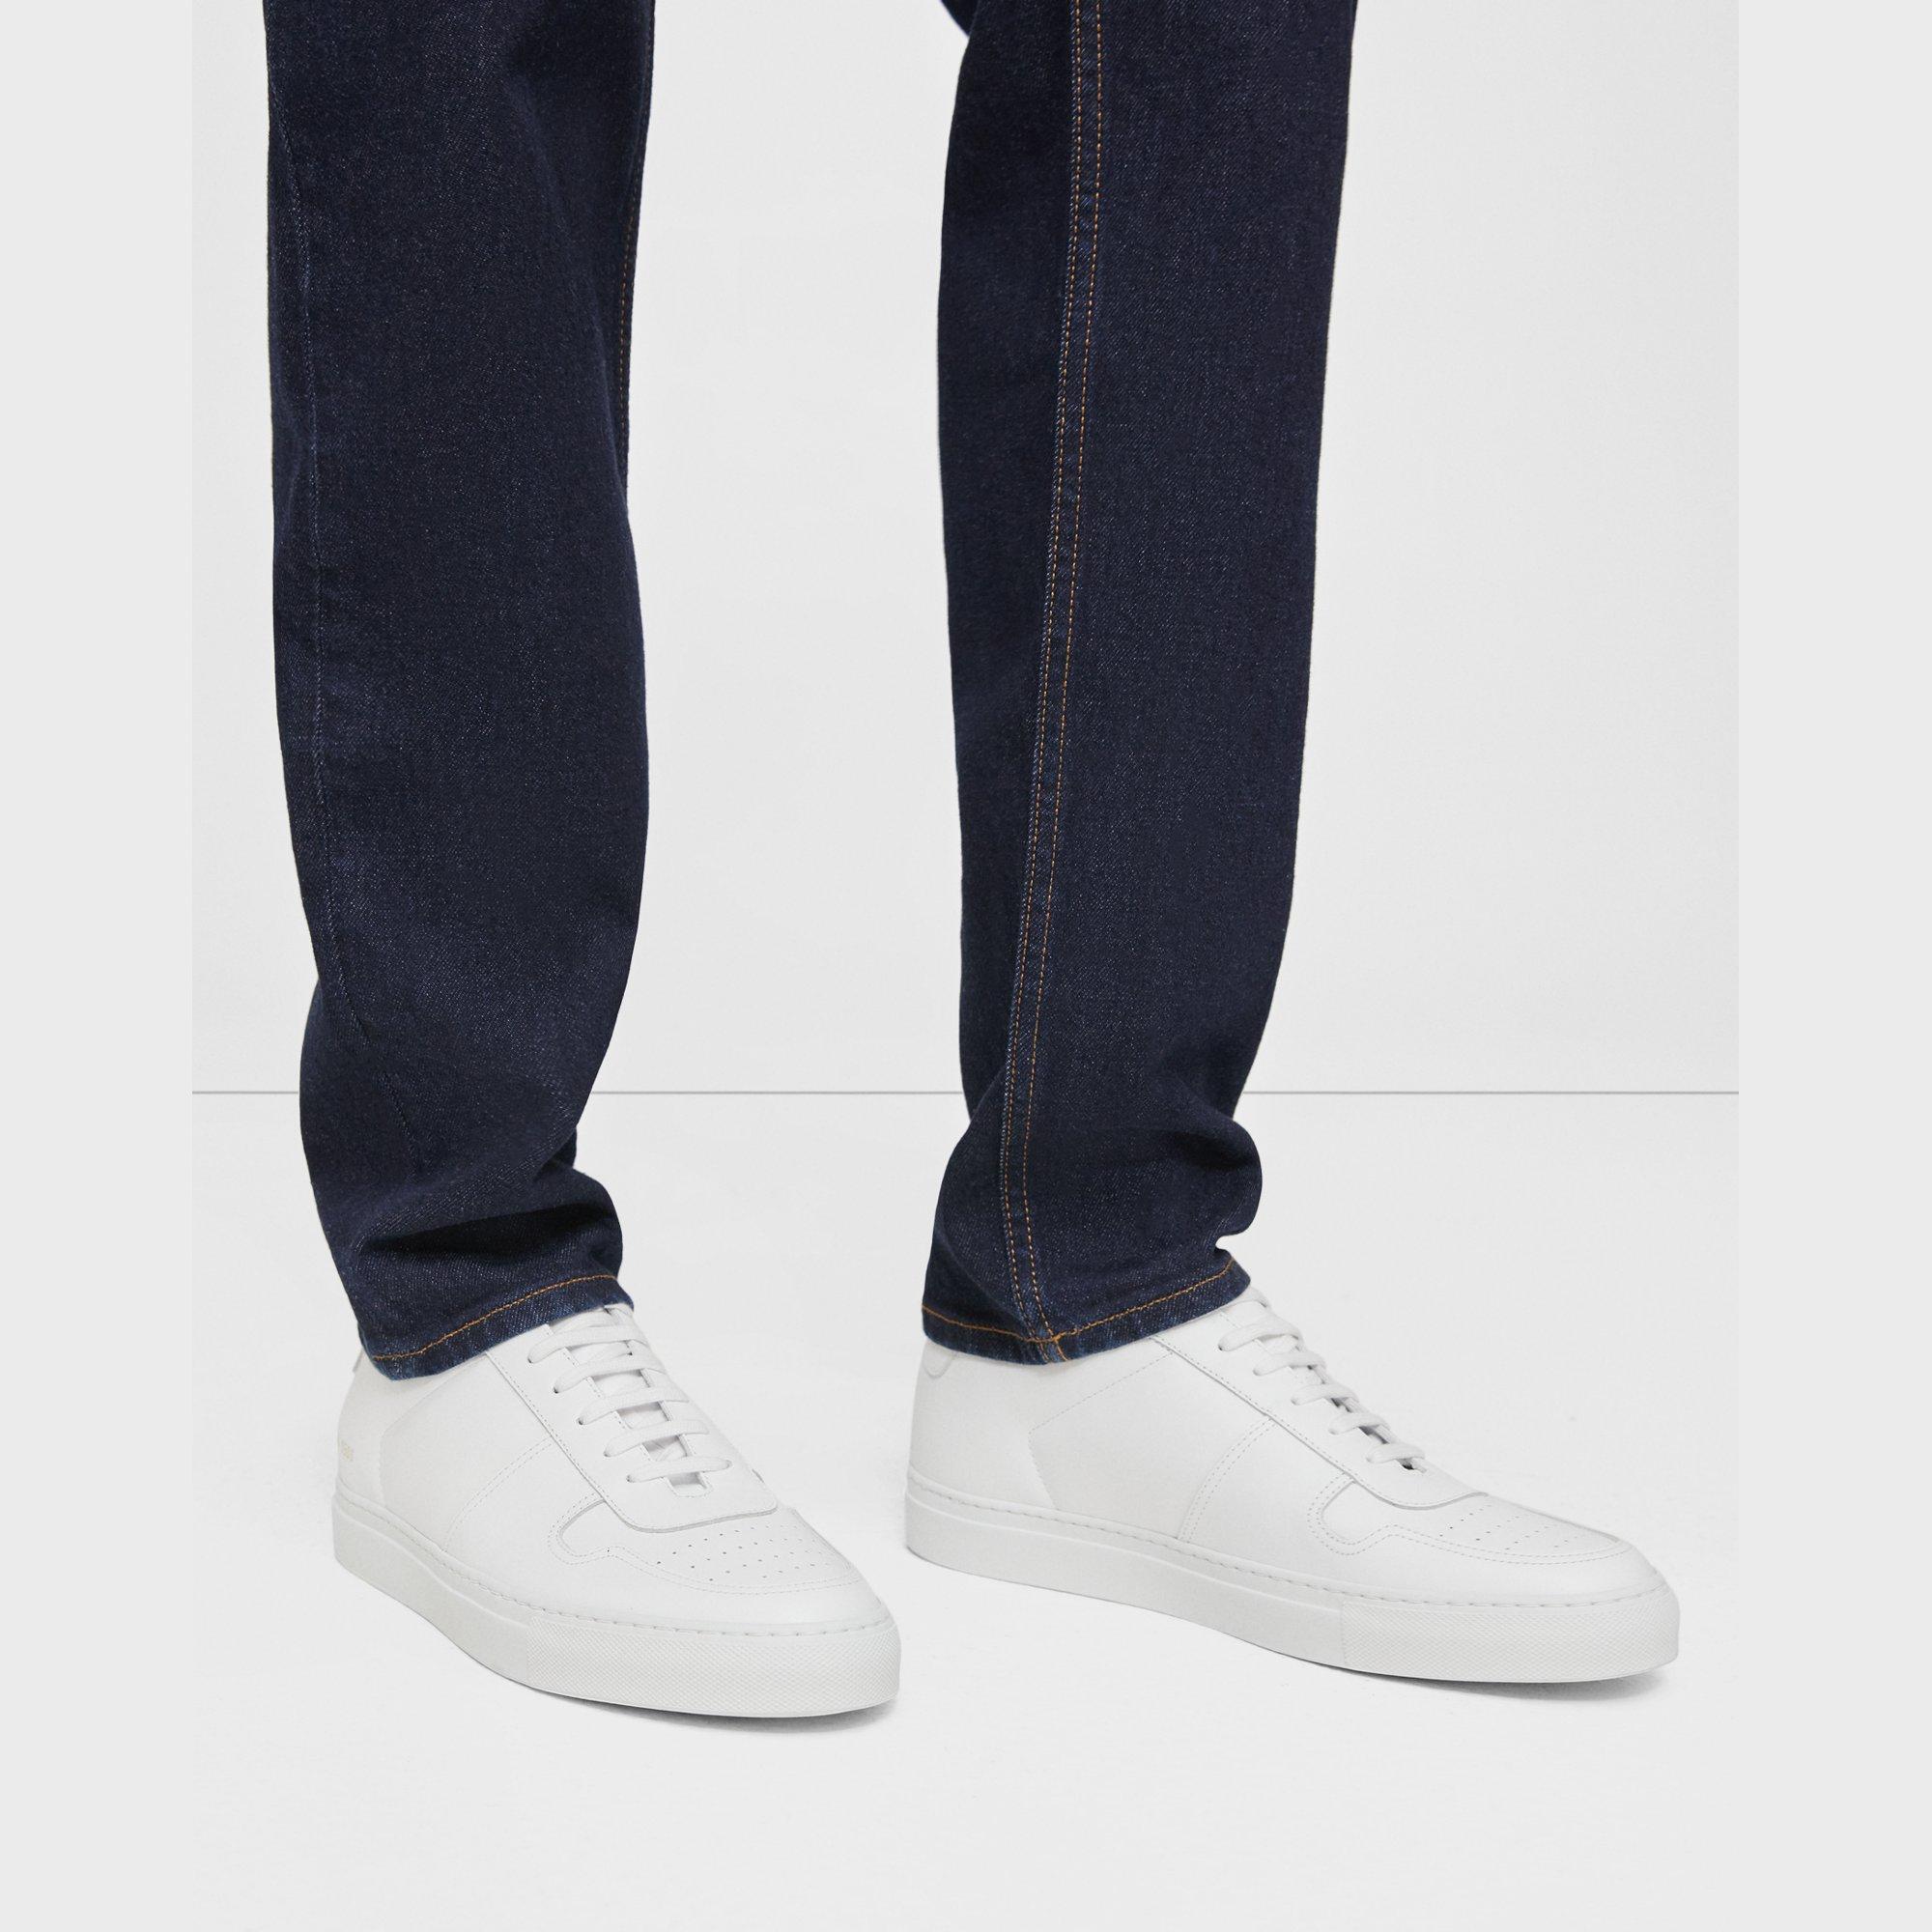 Theory Common Projects Men's BBall Low-Top Sneakers